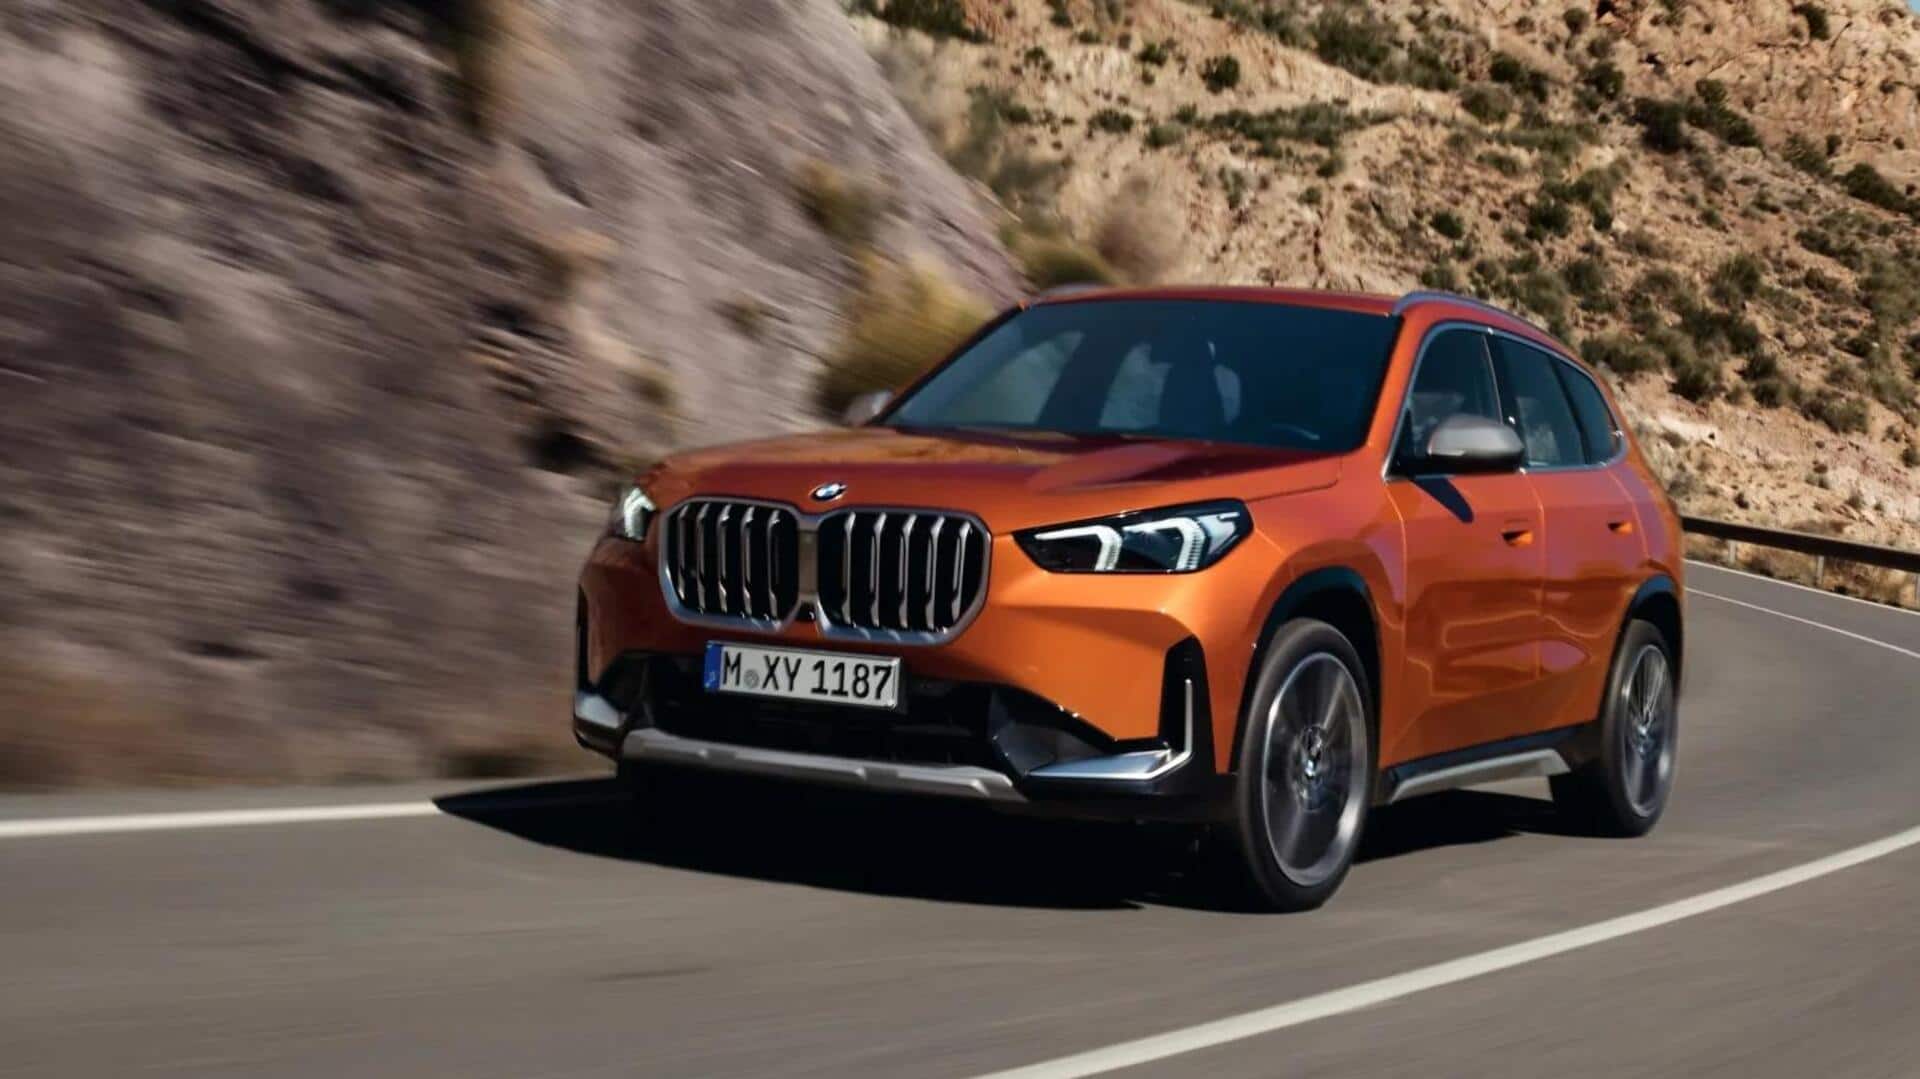 BMW X1 becomes pricier by Rs. 90,000 in India